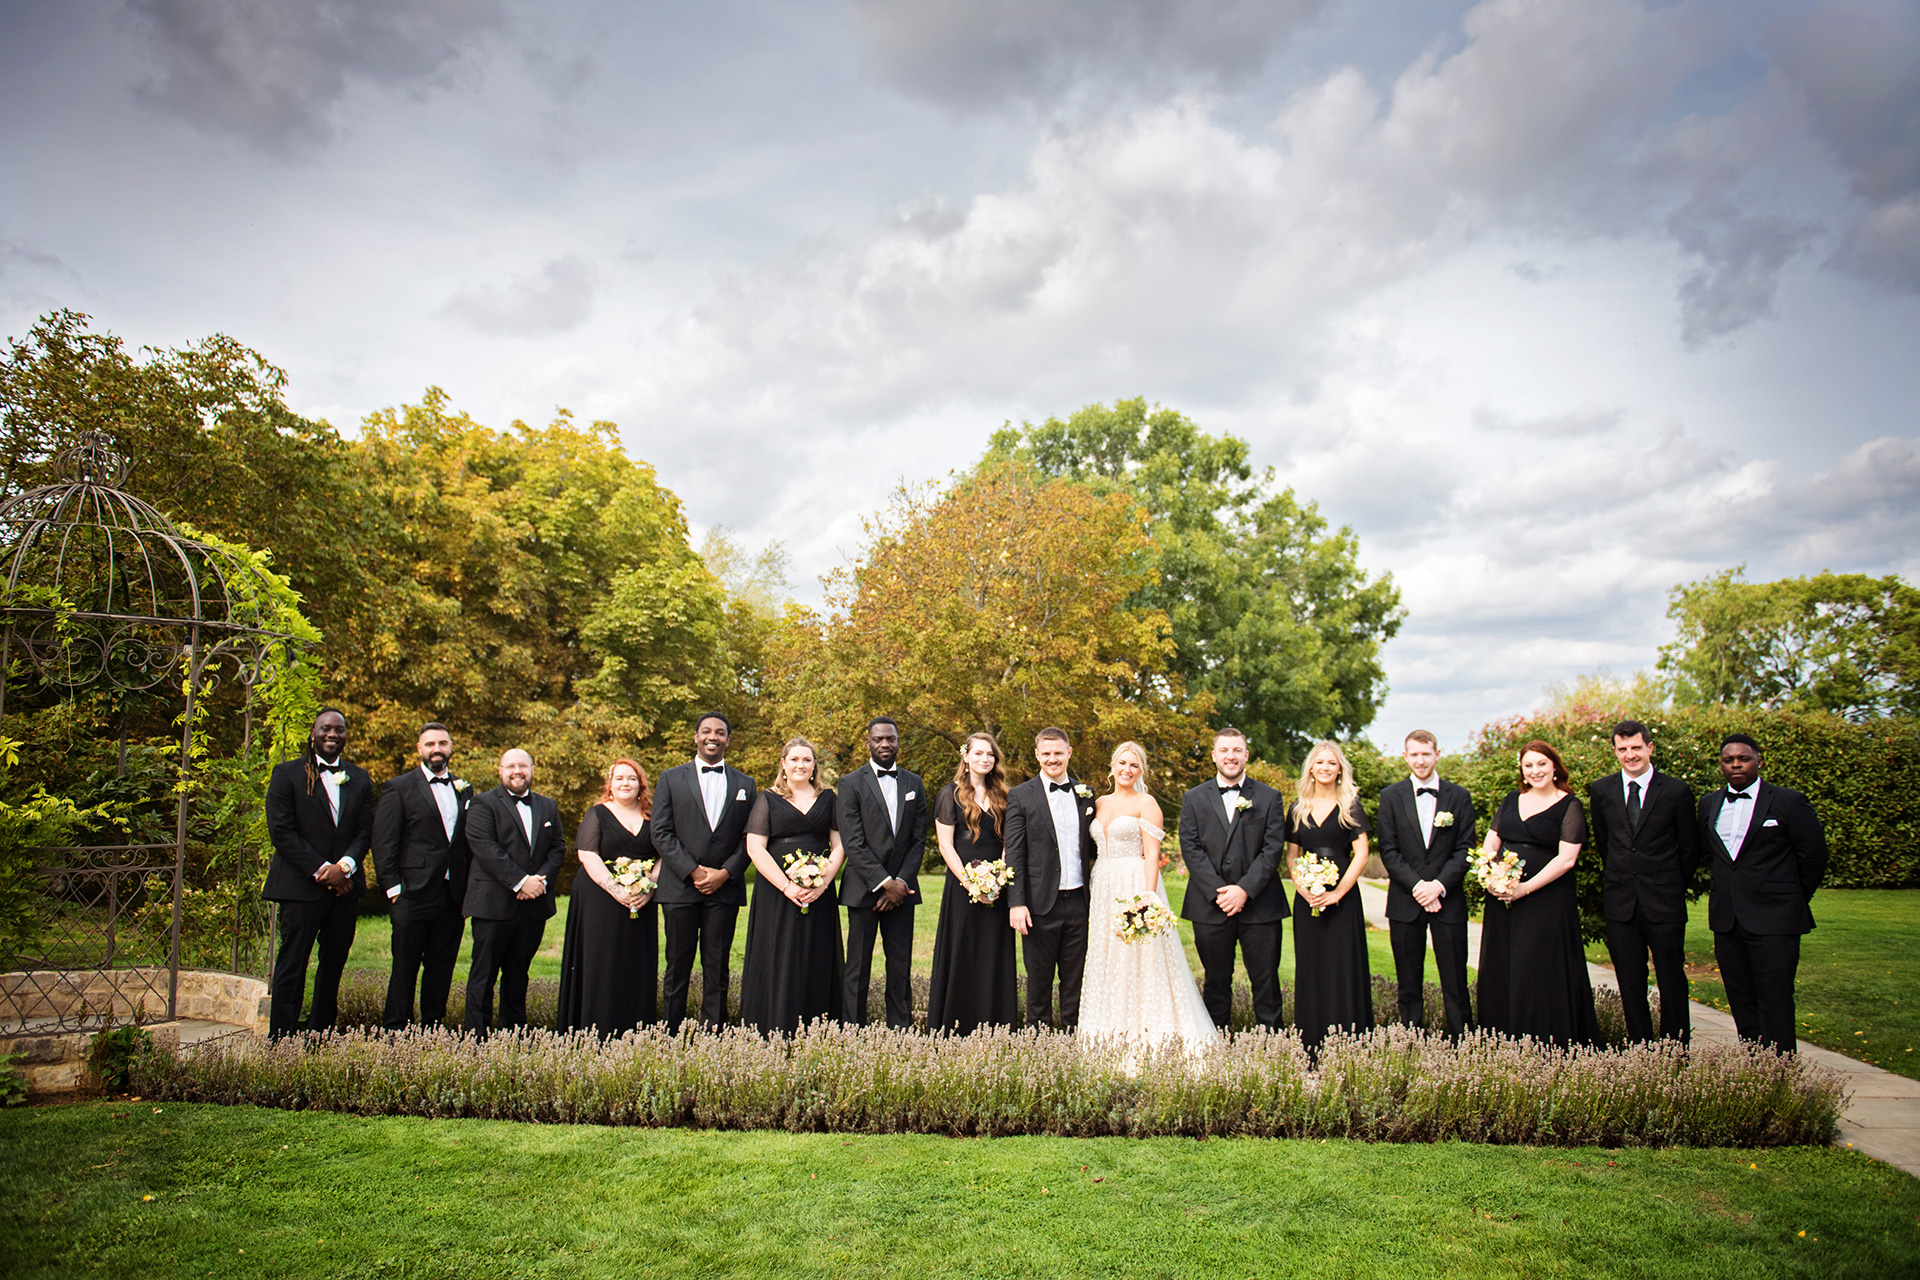 Bridal party pose for their photo along a lavender pathway with the bride and groom, autumnal tree's behind them.